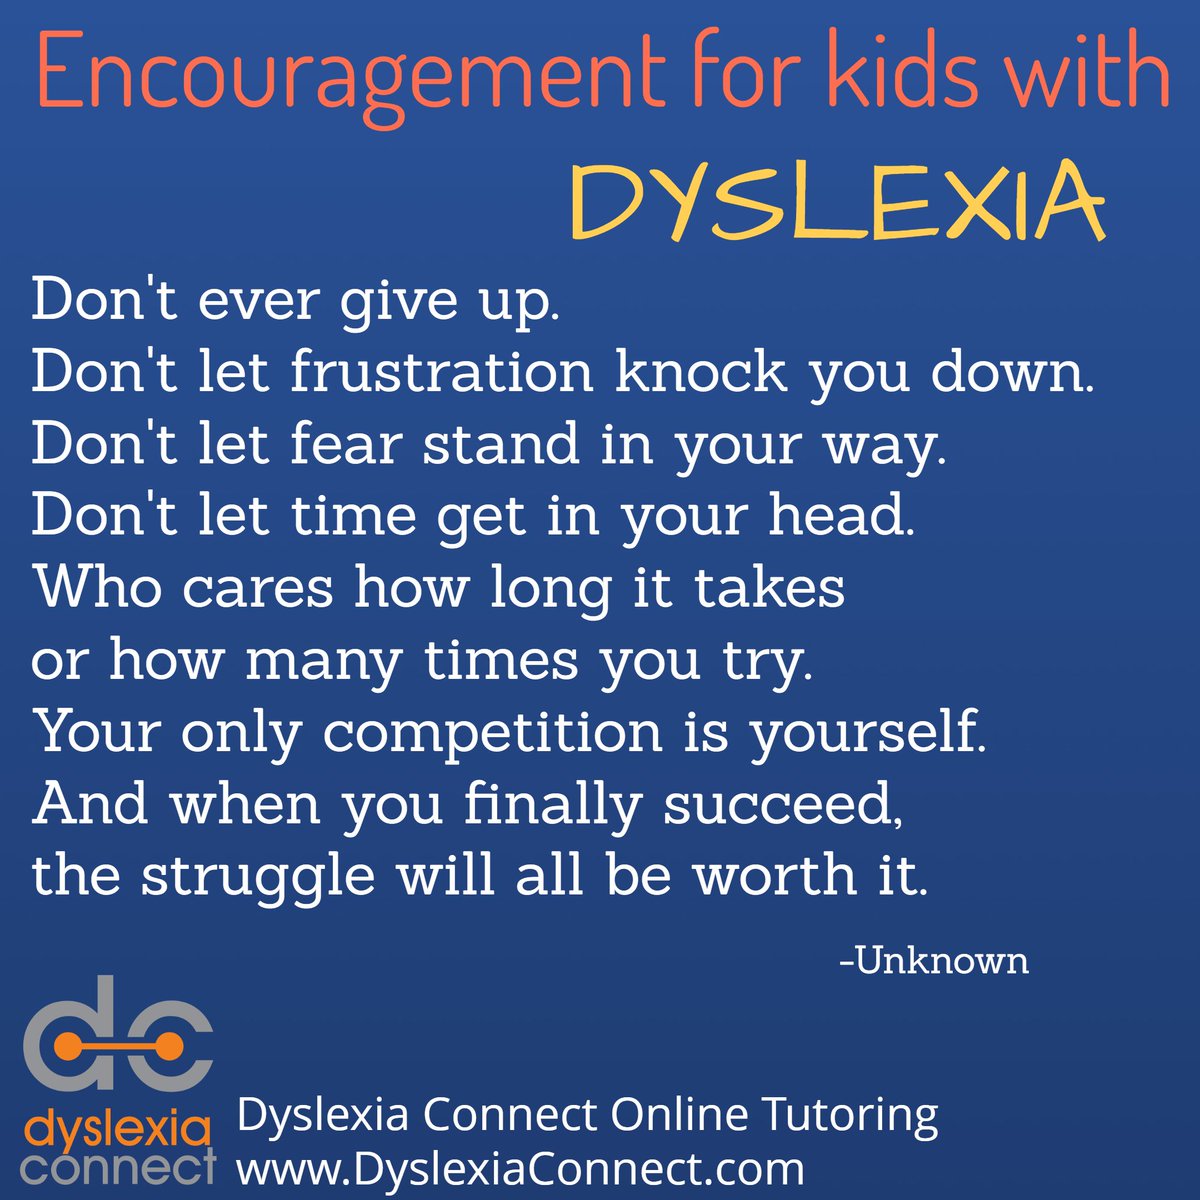 Don't ever give up! The struggle will all be worth it! Such important words to share with children who have dyslexia, and those who work so hard to advocate for them! DyslexiaConnect.com #dyslexia #ADHD #scienceofreading #dysgraphia